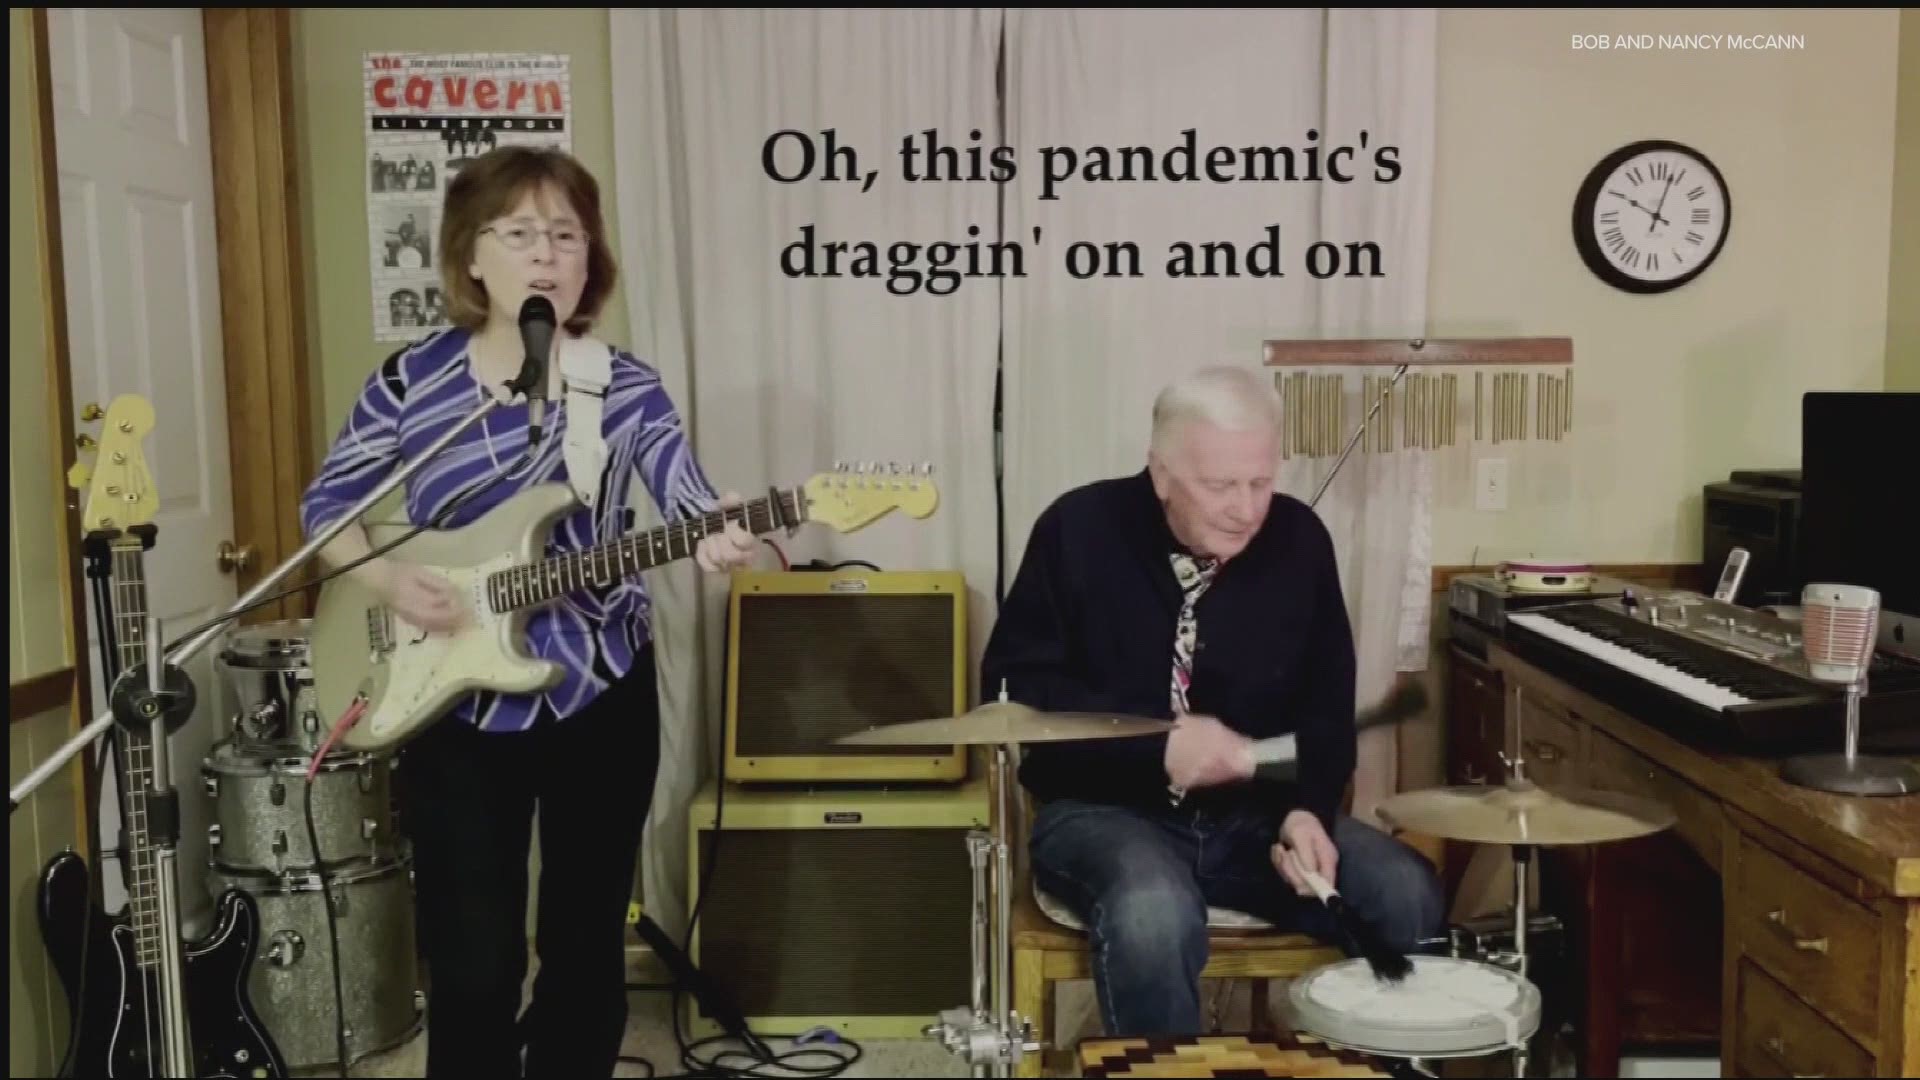 From Tom Petty to The Beatles, Bob and Nancy McCann are using their talent to bring joy and awareness amidst the pandemic.